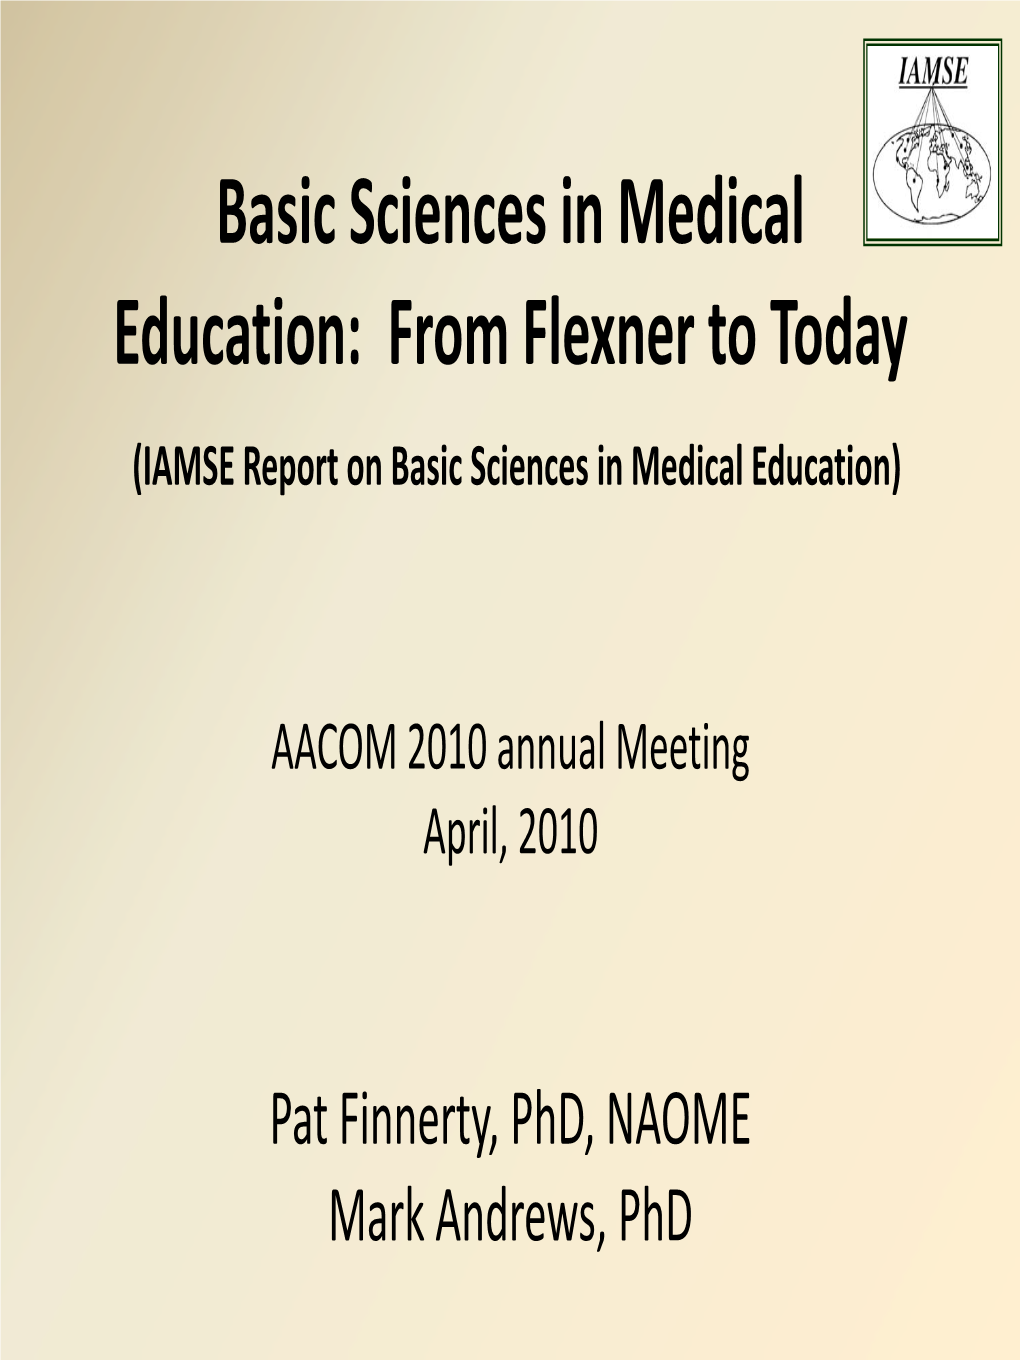 Basic Sciences in Medical Education: from Flexner to Today (IAMSE Report on Basic Sciences in Medical Education)